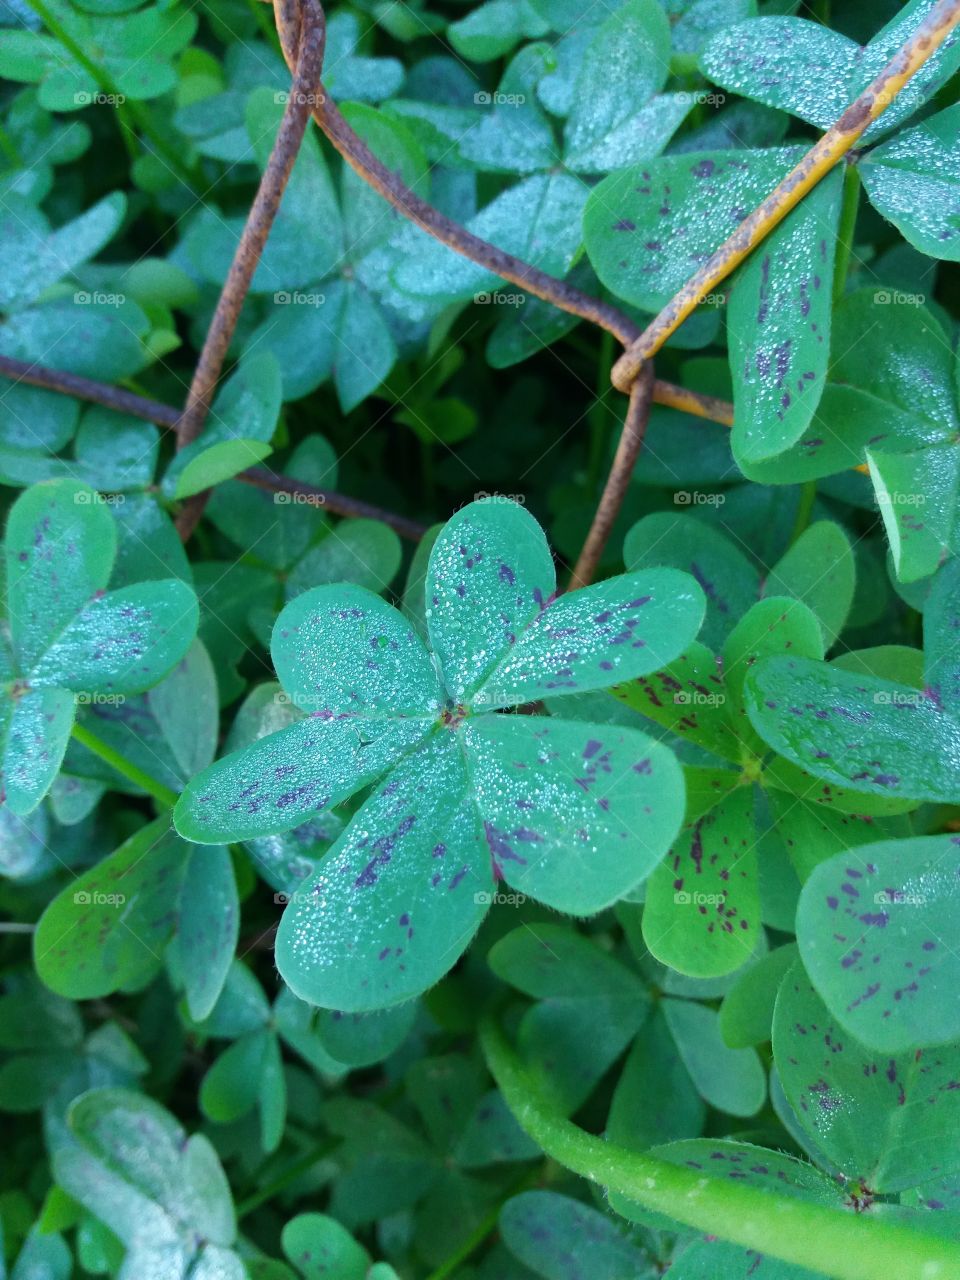 Just some clovers after a rainy day.